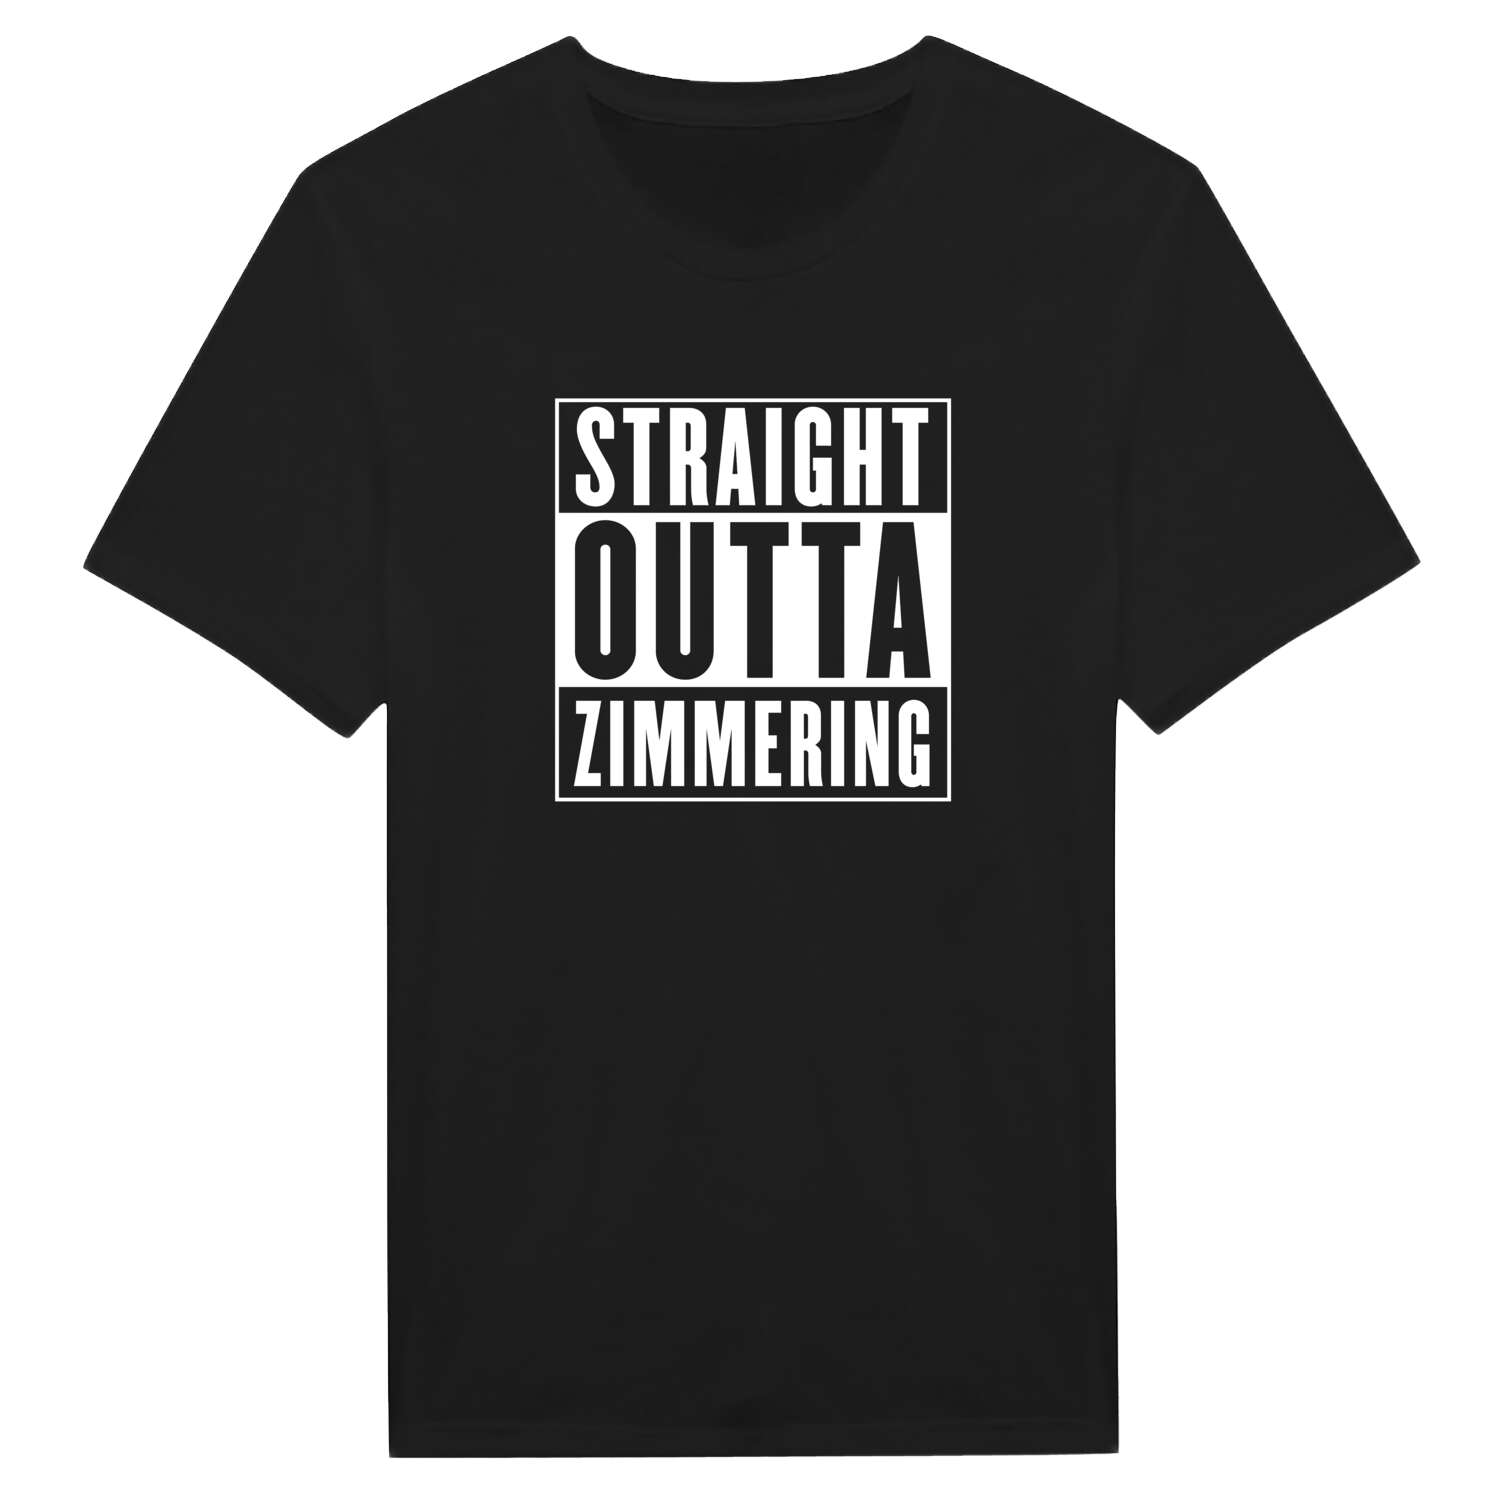 Zimmering T-Shirt »Straight Outta«